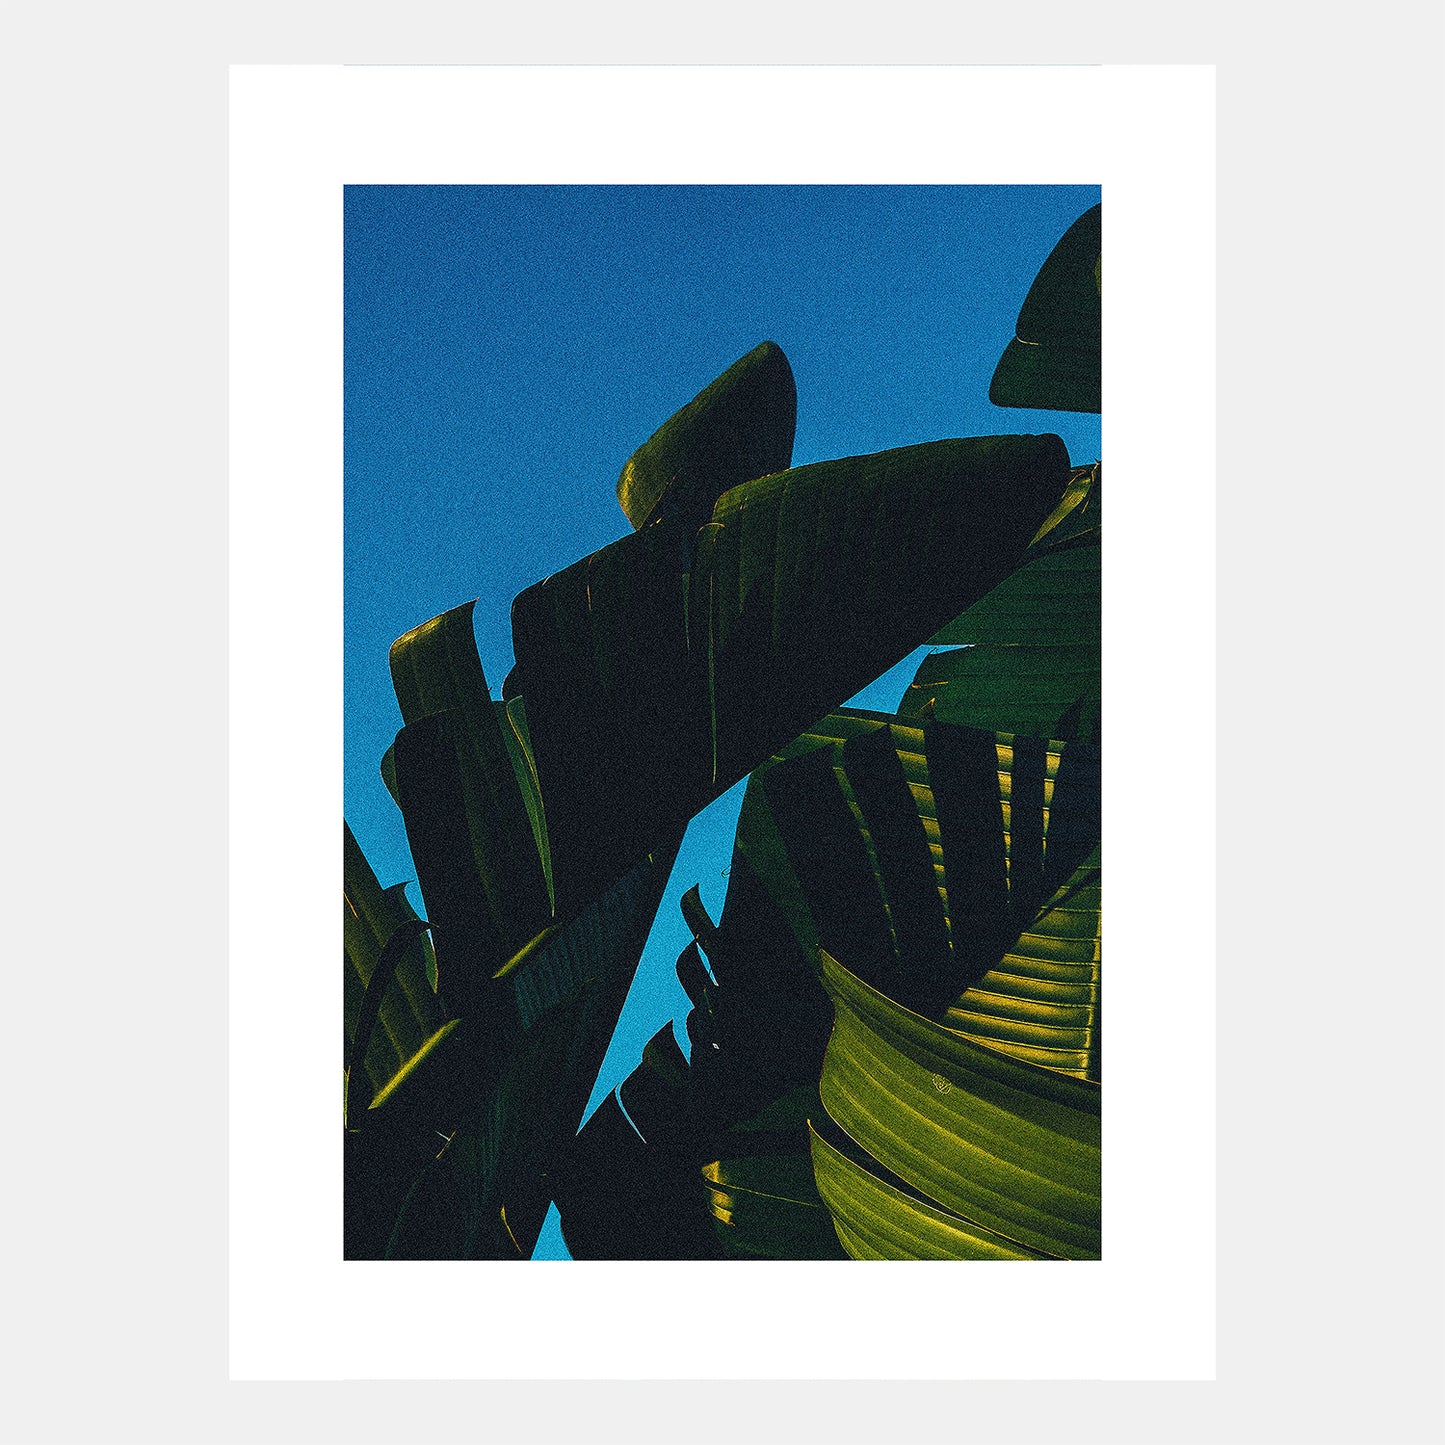 "Hot Summer Banana Tree" by Rooster Chen